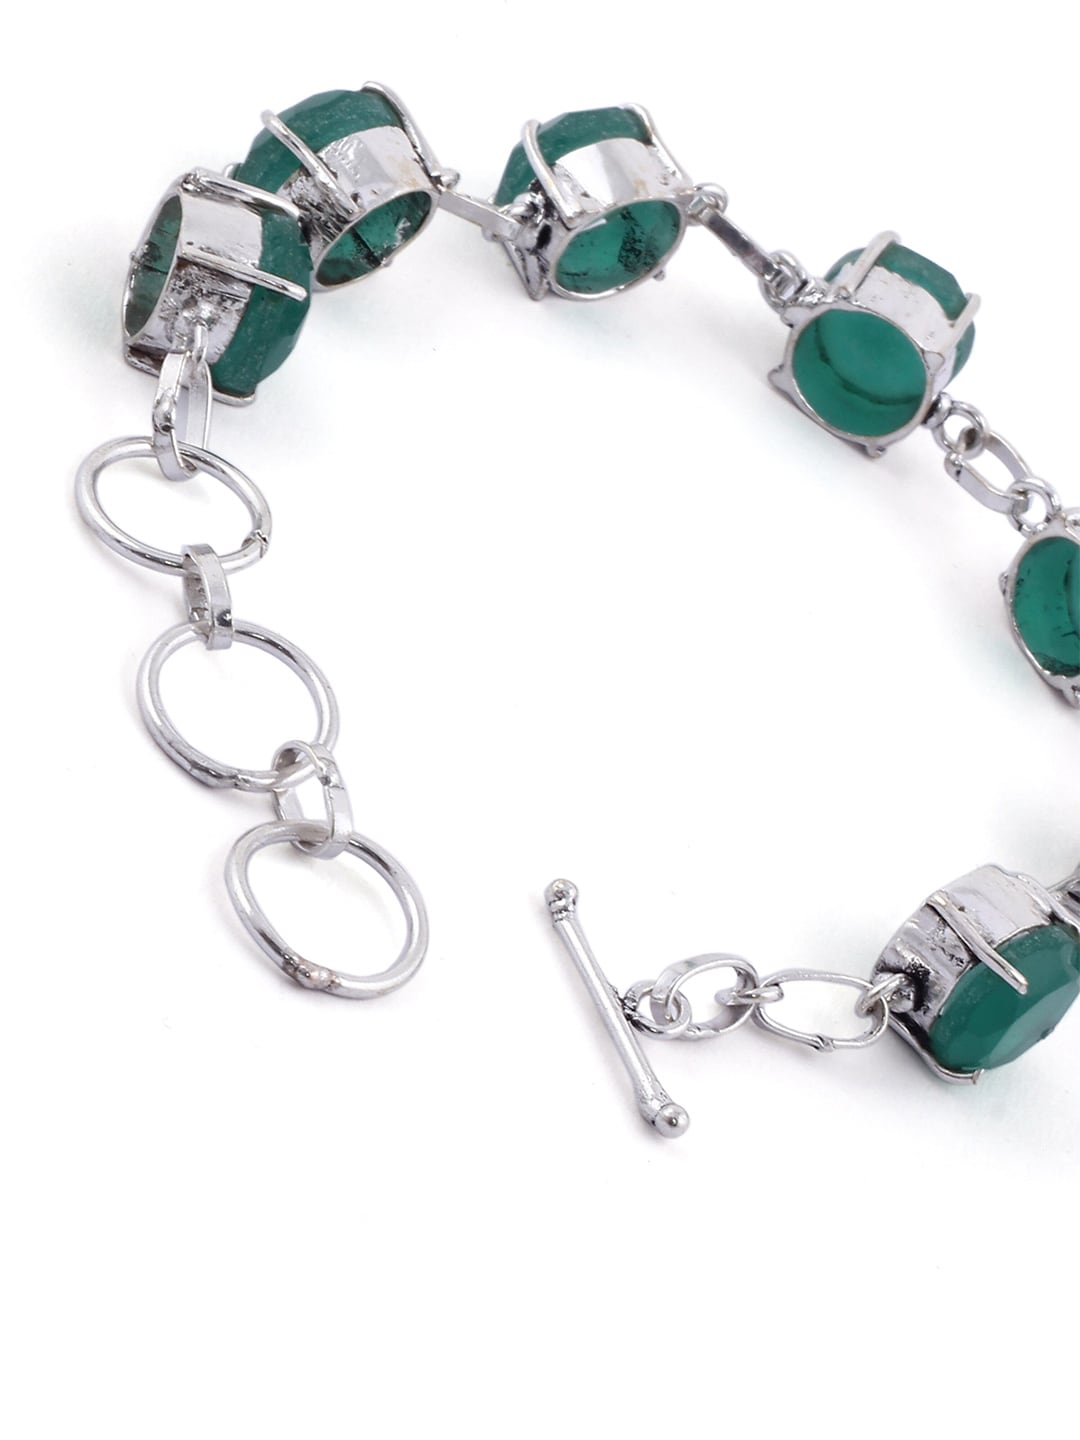 EL REGALO Women Green & Silver-Toned Brass Handcrafted Charm Bracelet - for Women and Girls
Style ID: 17147886